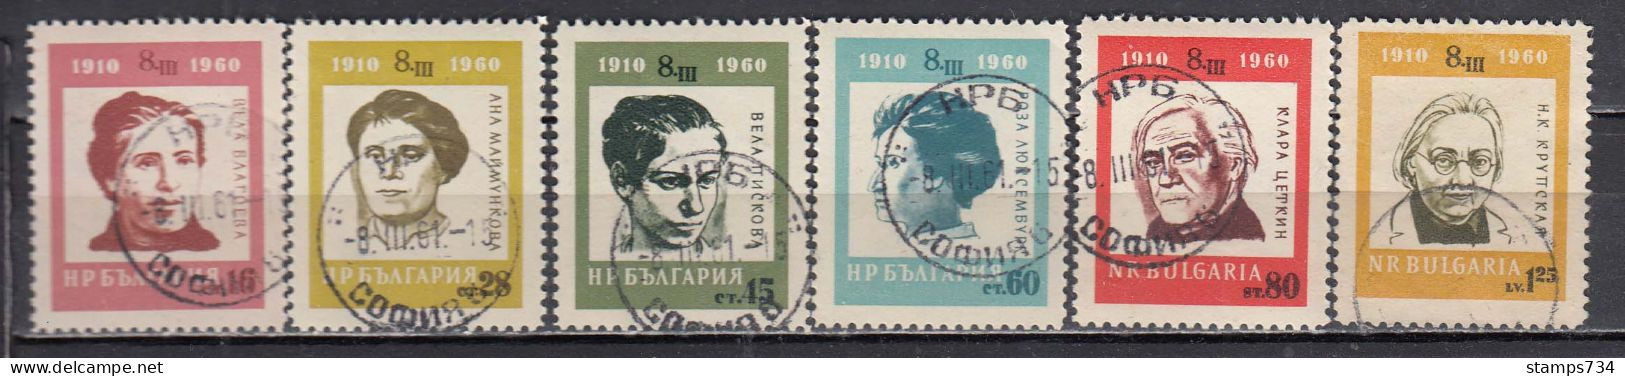 Bulgaria 1960 - 50 Years International Women's Day, Mi-Nr. 1154/59, Used - Used Stamps